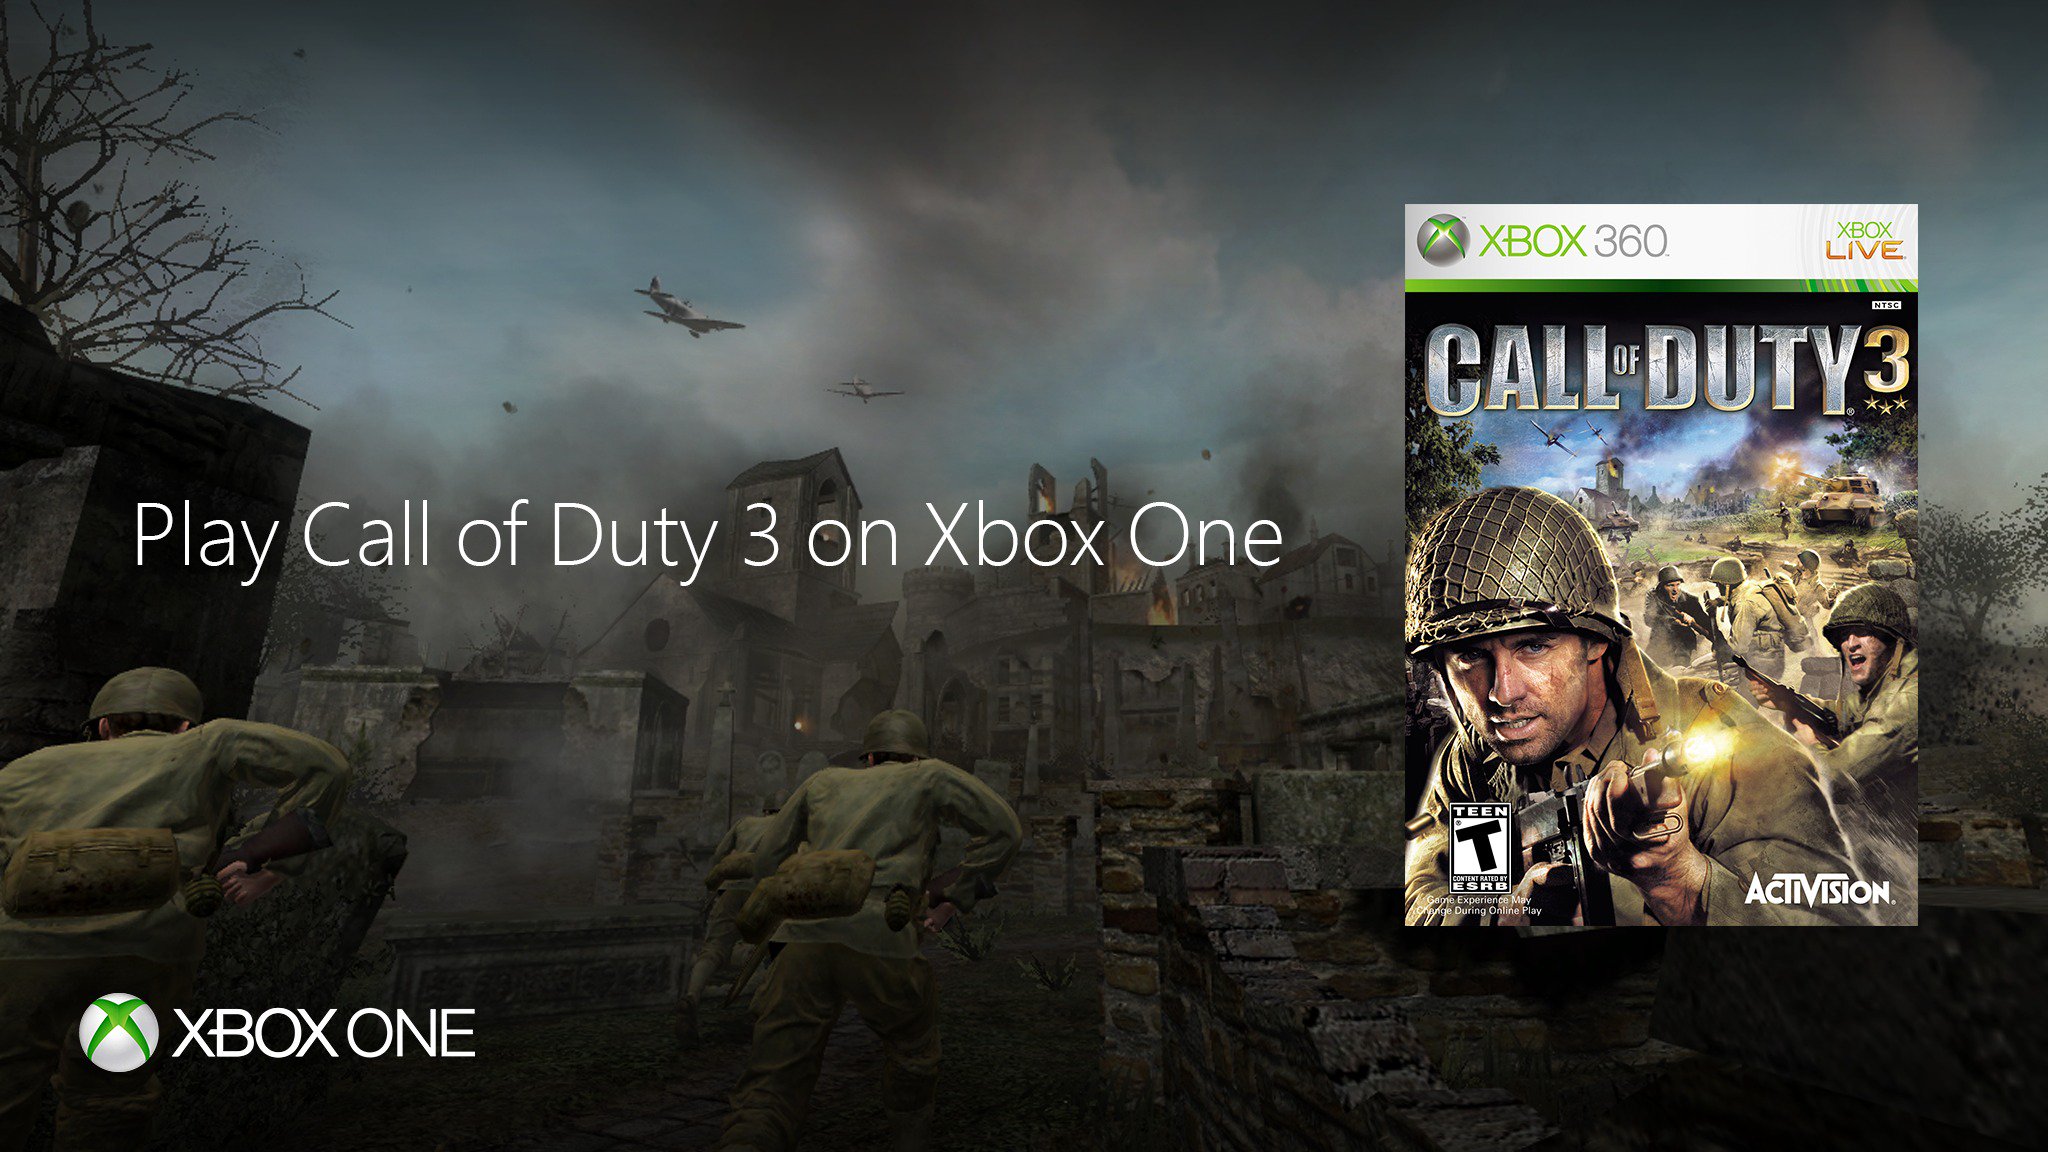 Call of duty xbox game. Call of Duty 3 иксбокс. Call of Duty 3 Xbox one. Call of Duty 3 Xbox 360. Игра на Xbox 360 Call of Duty 3.